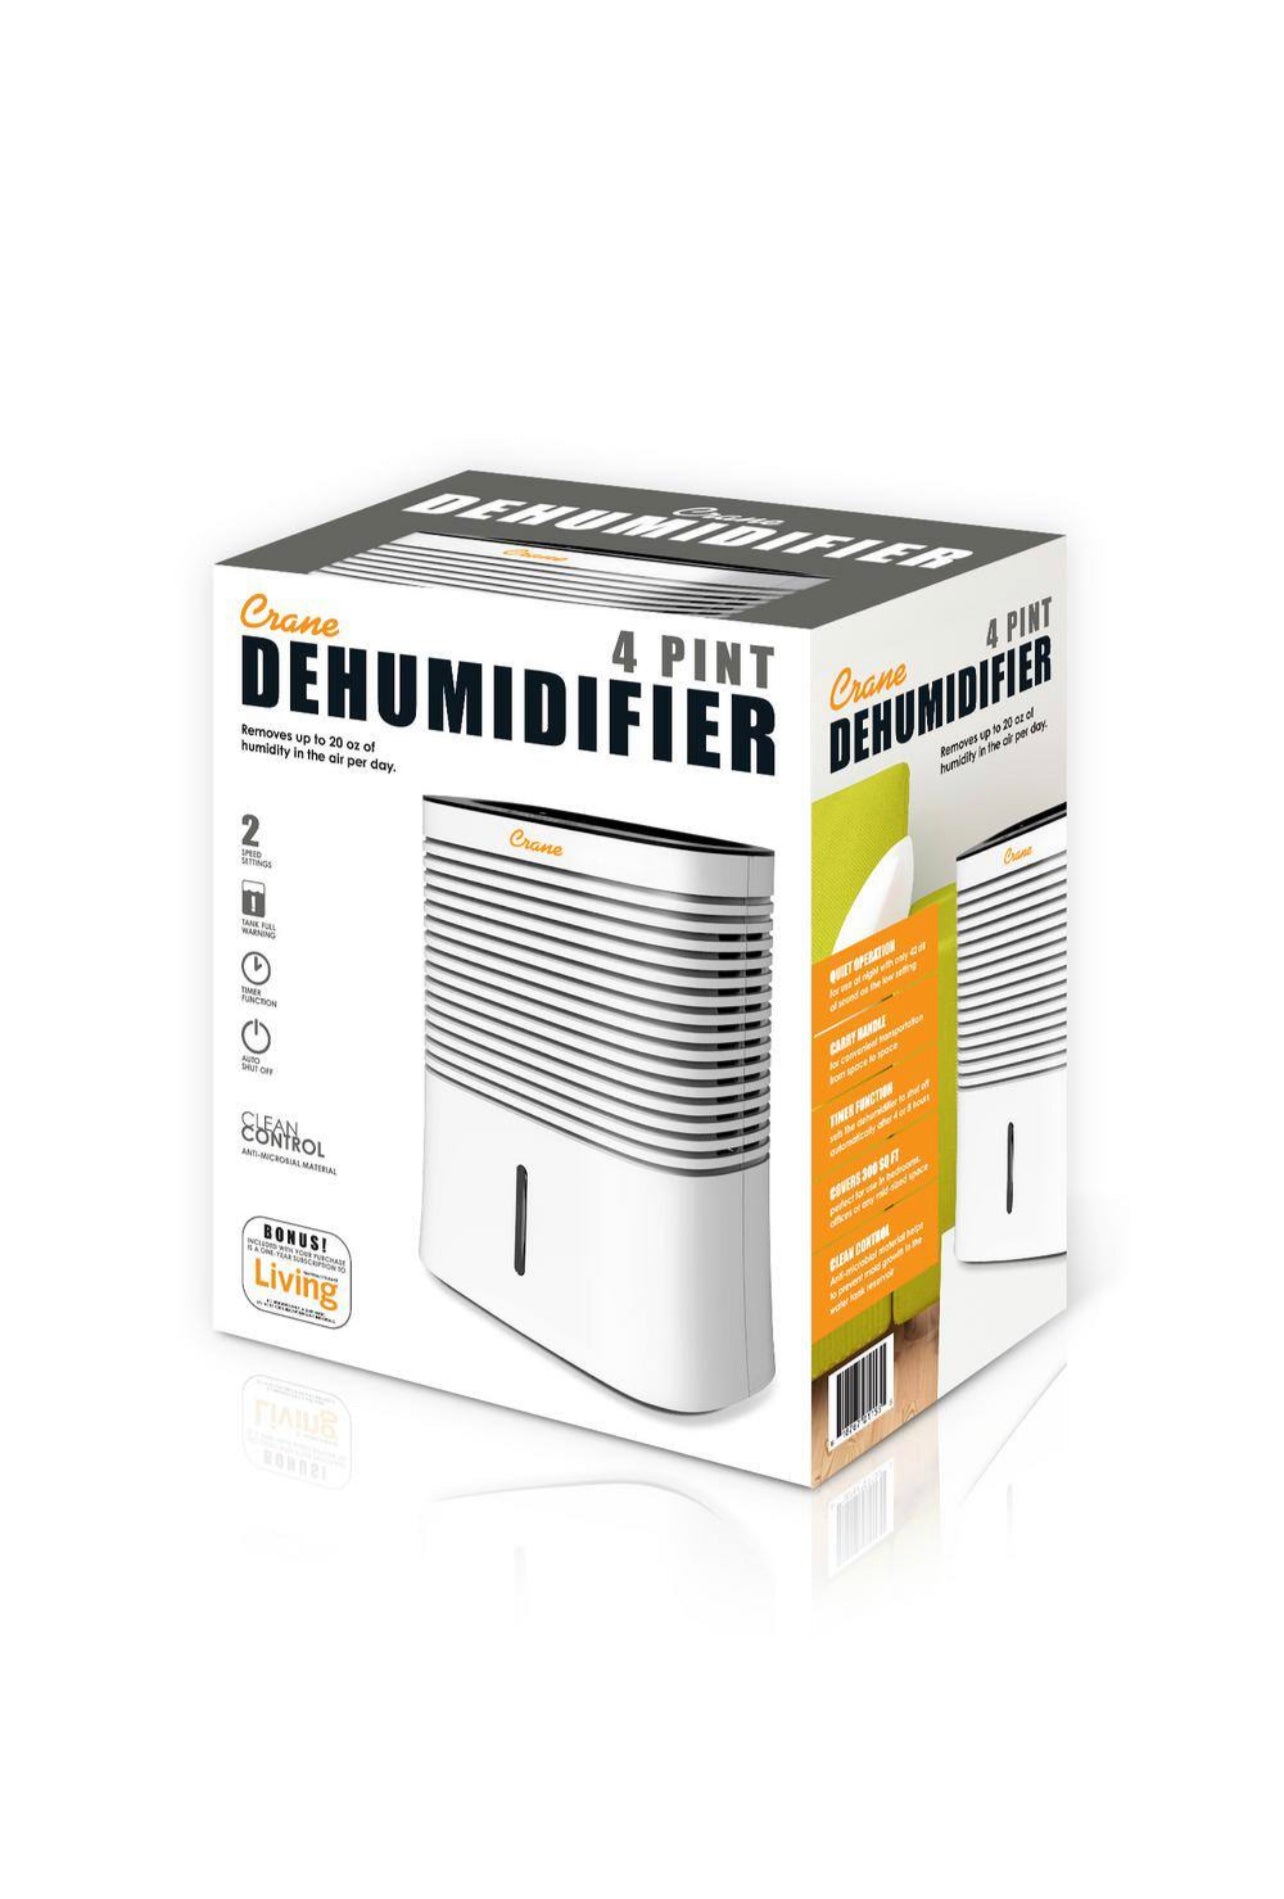 Crane 4 Pint Compact Dehumidifier with 2 Settings for Small to Medium Rooms up to 300 sq.ft. Damaged Box